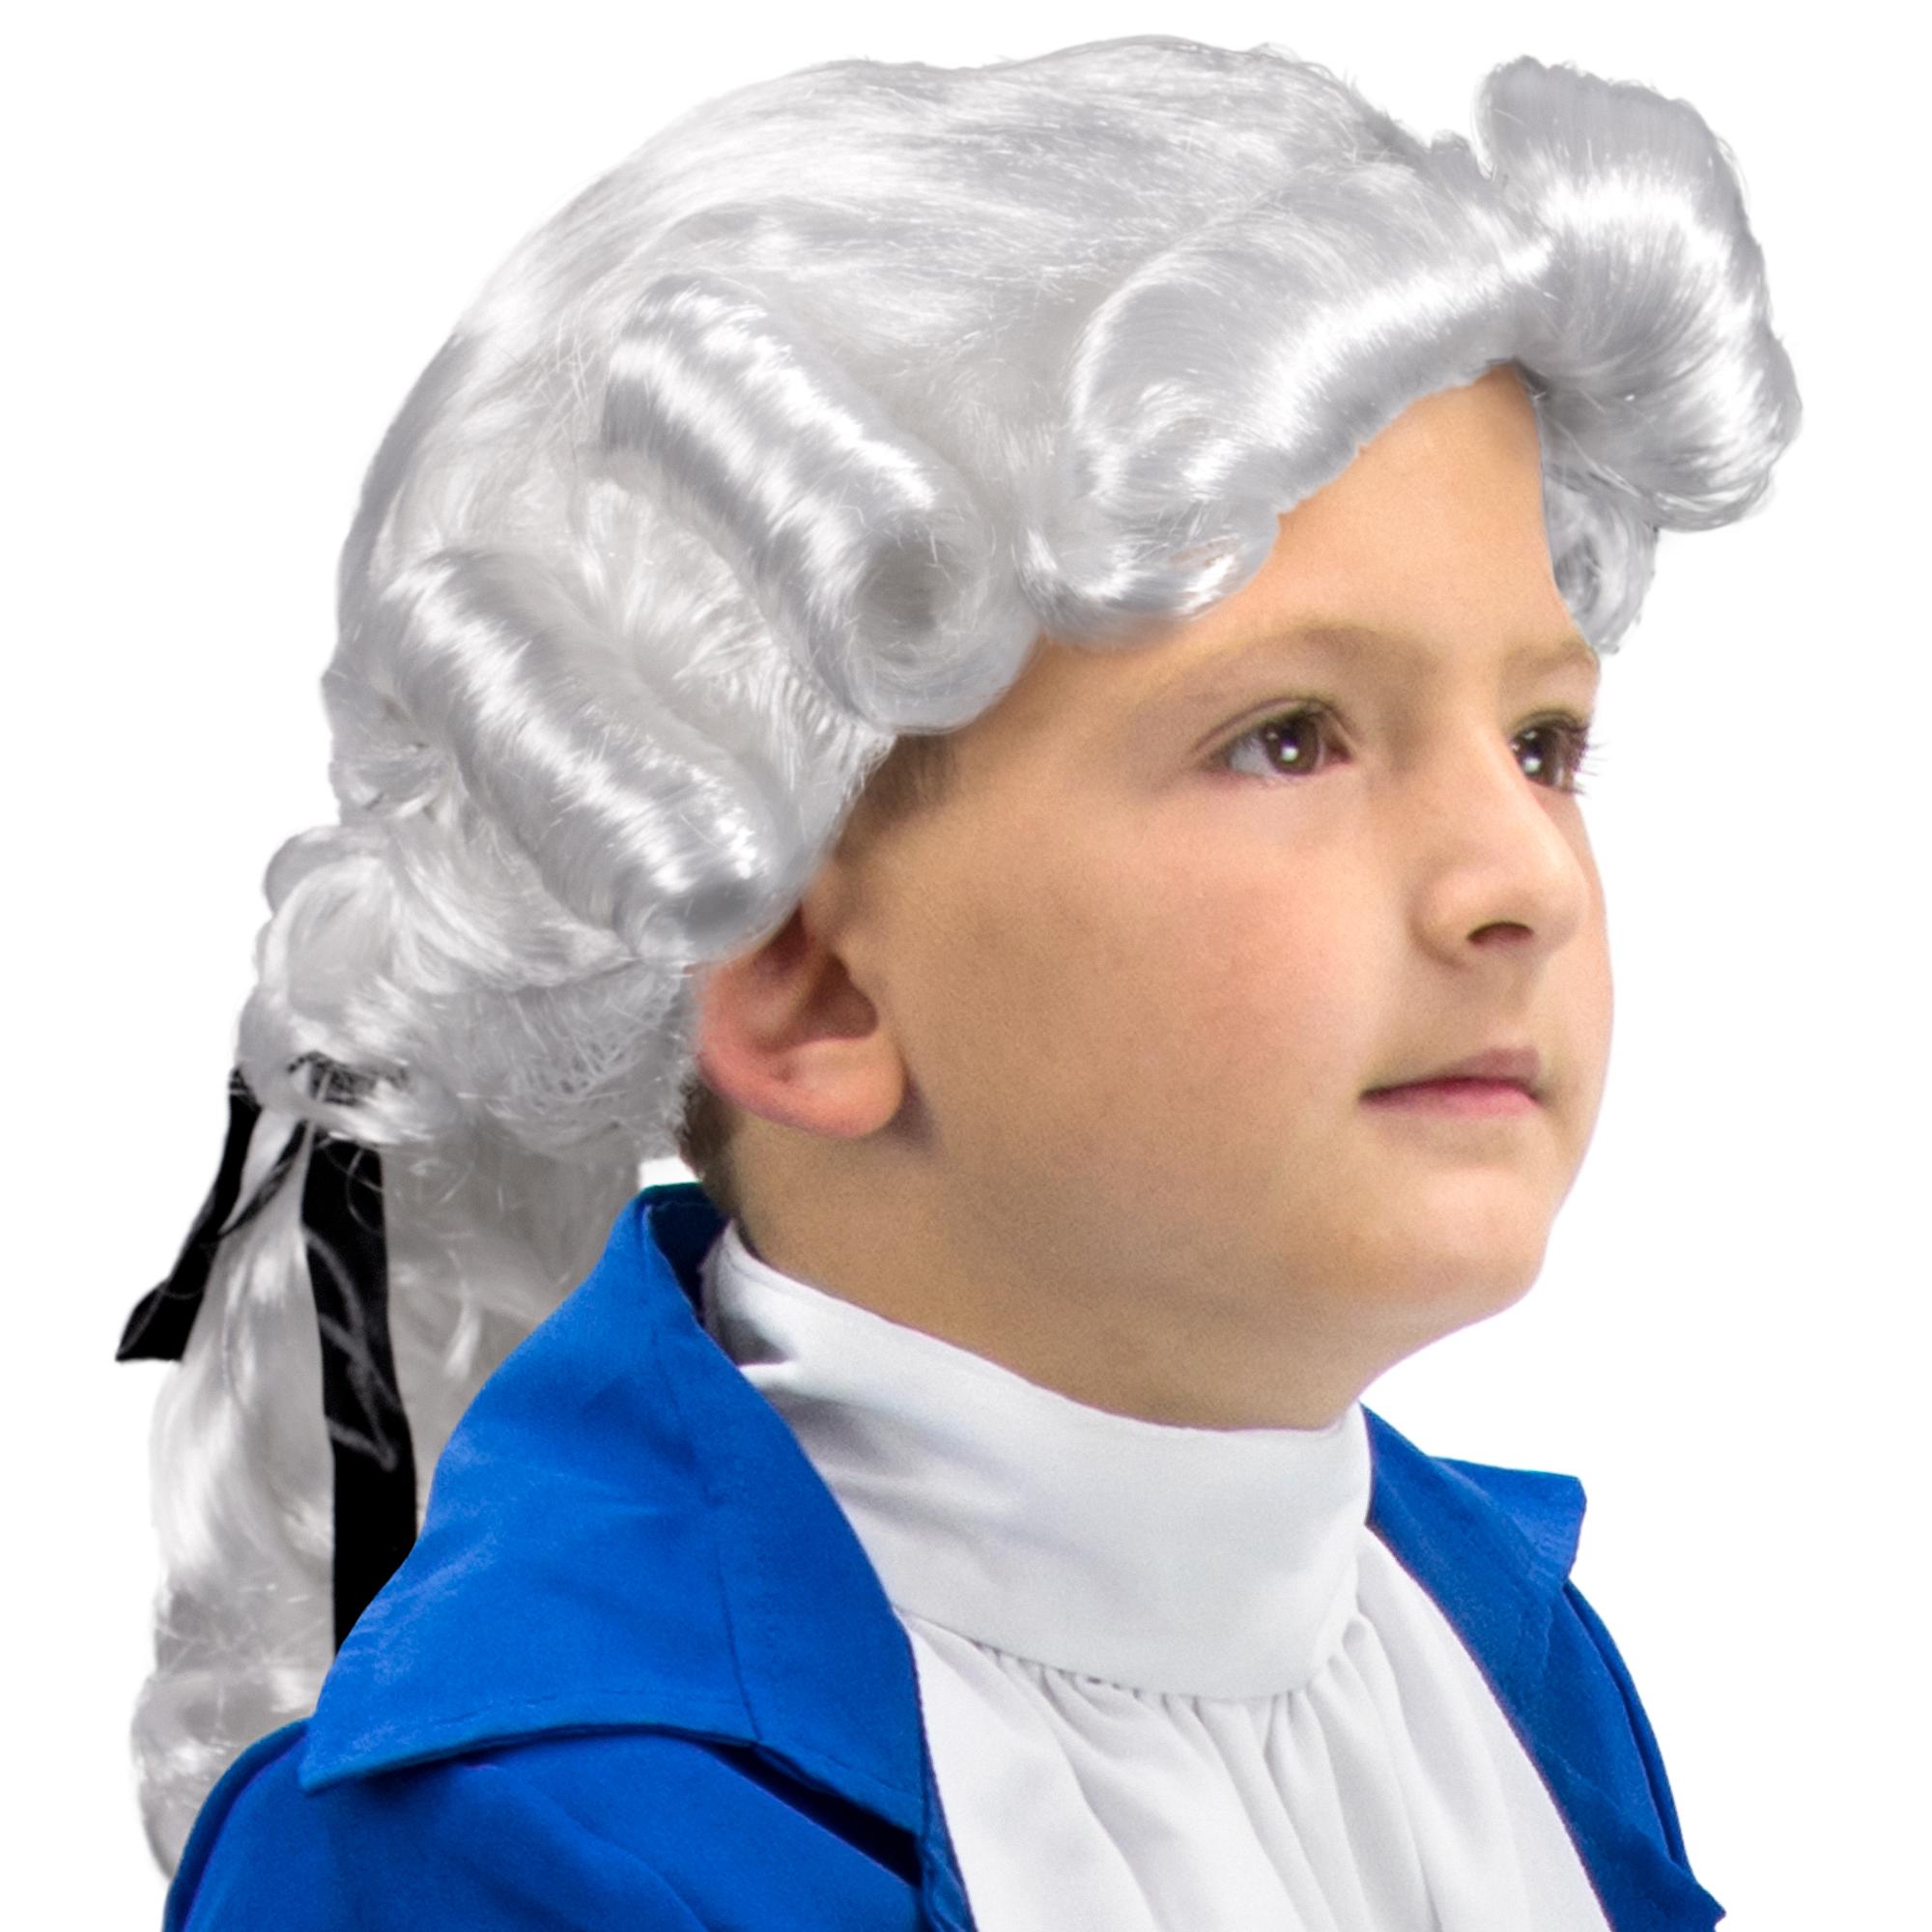 Colonial Powdered Wig, Child Size